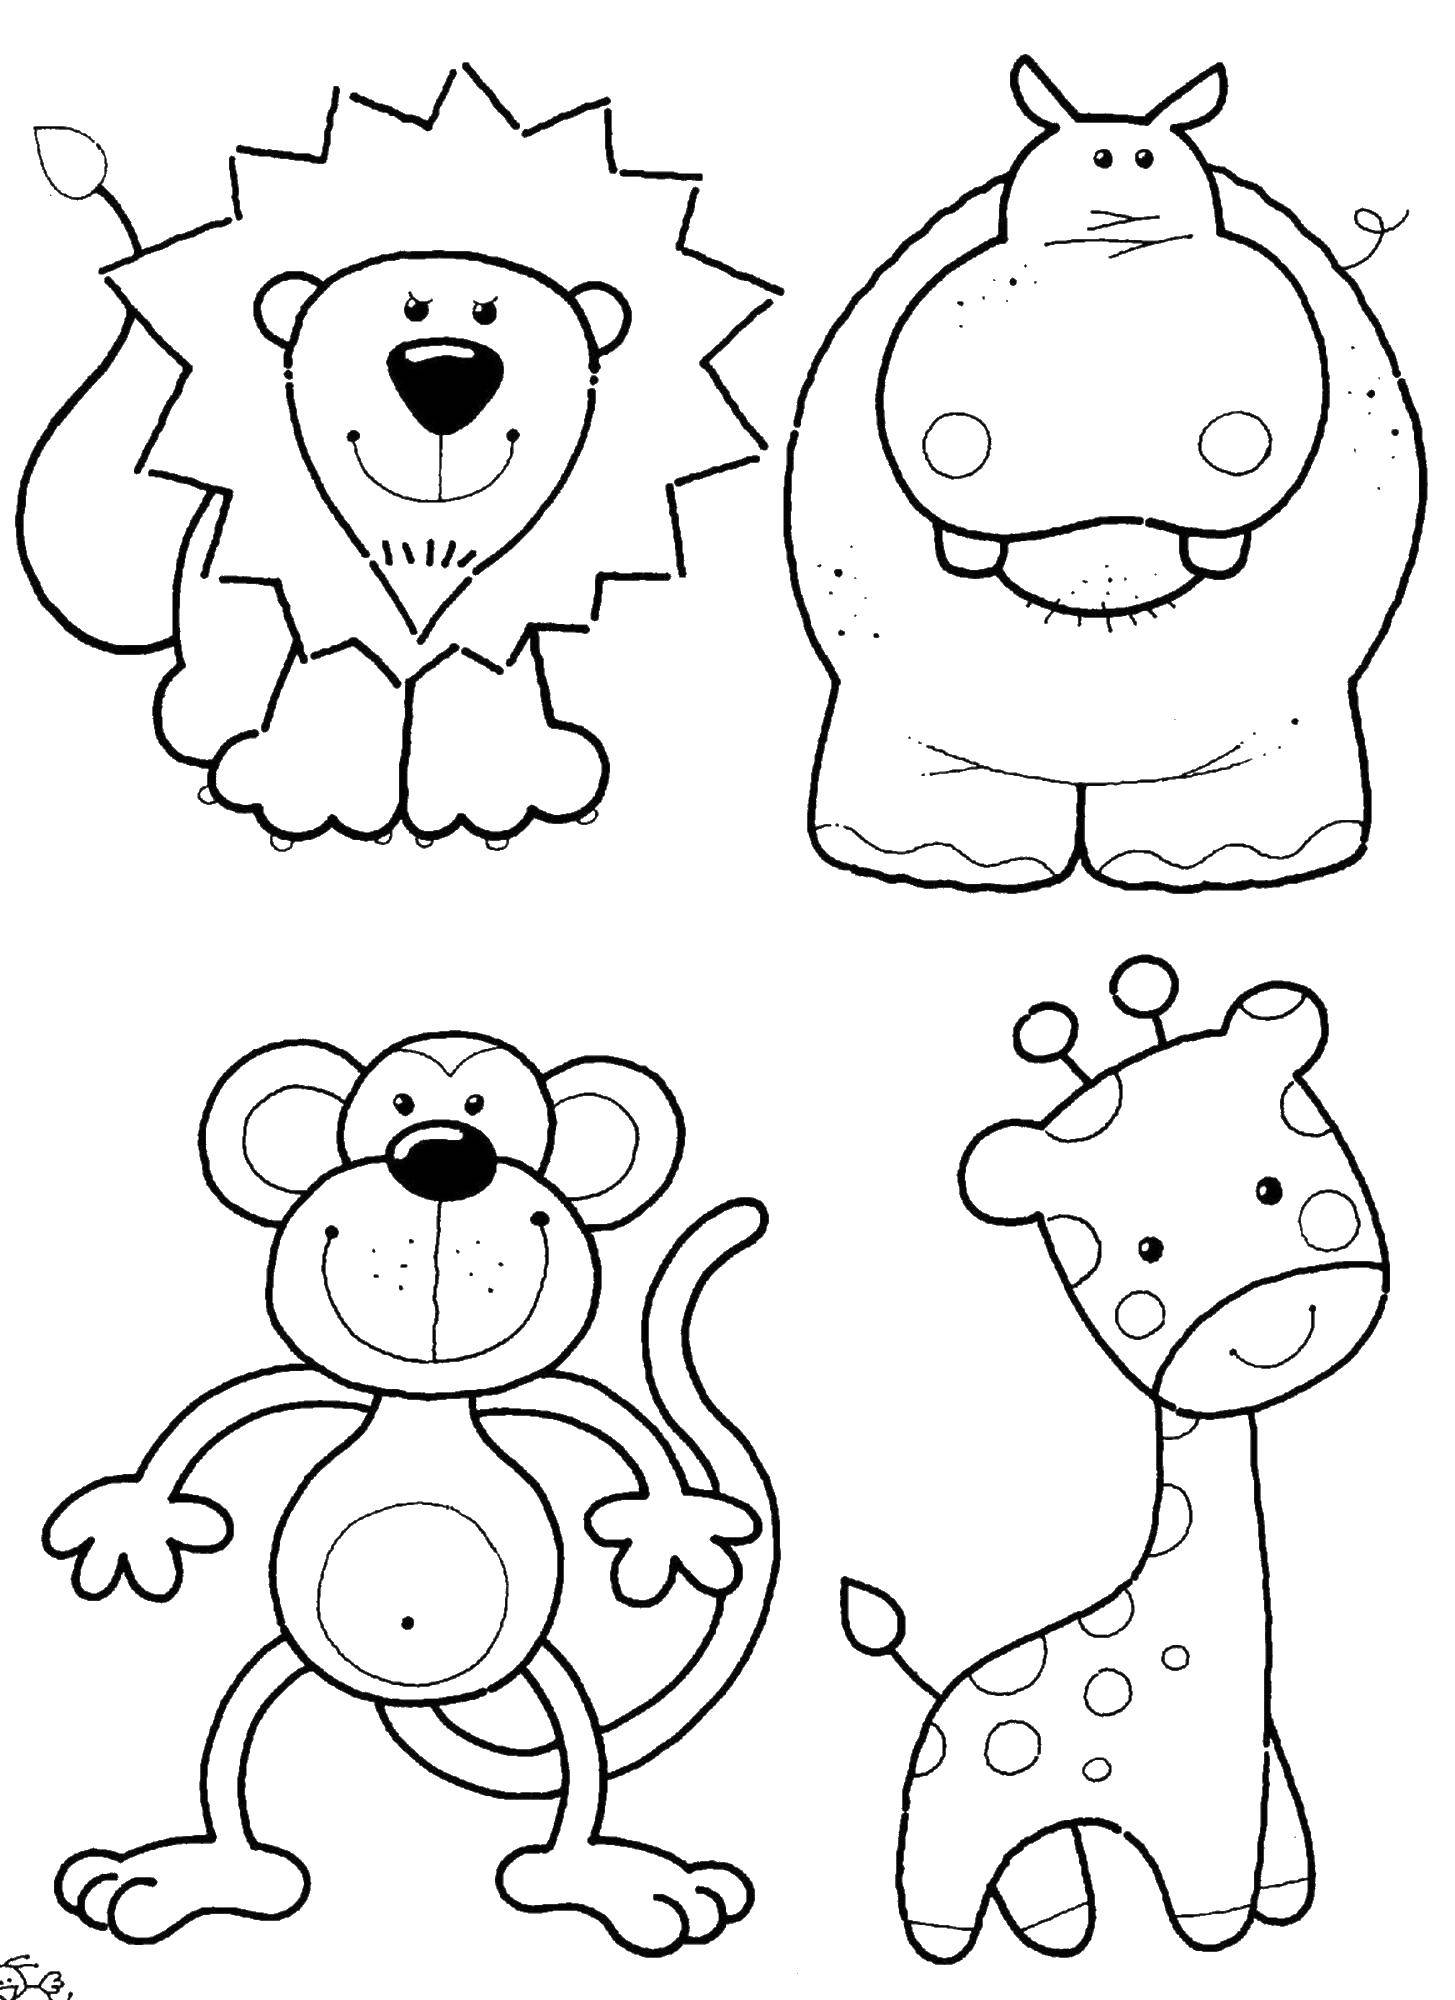 Coloring Animals. Category Coloring pages for kids. Tags:  animals.